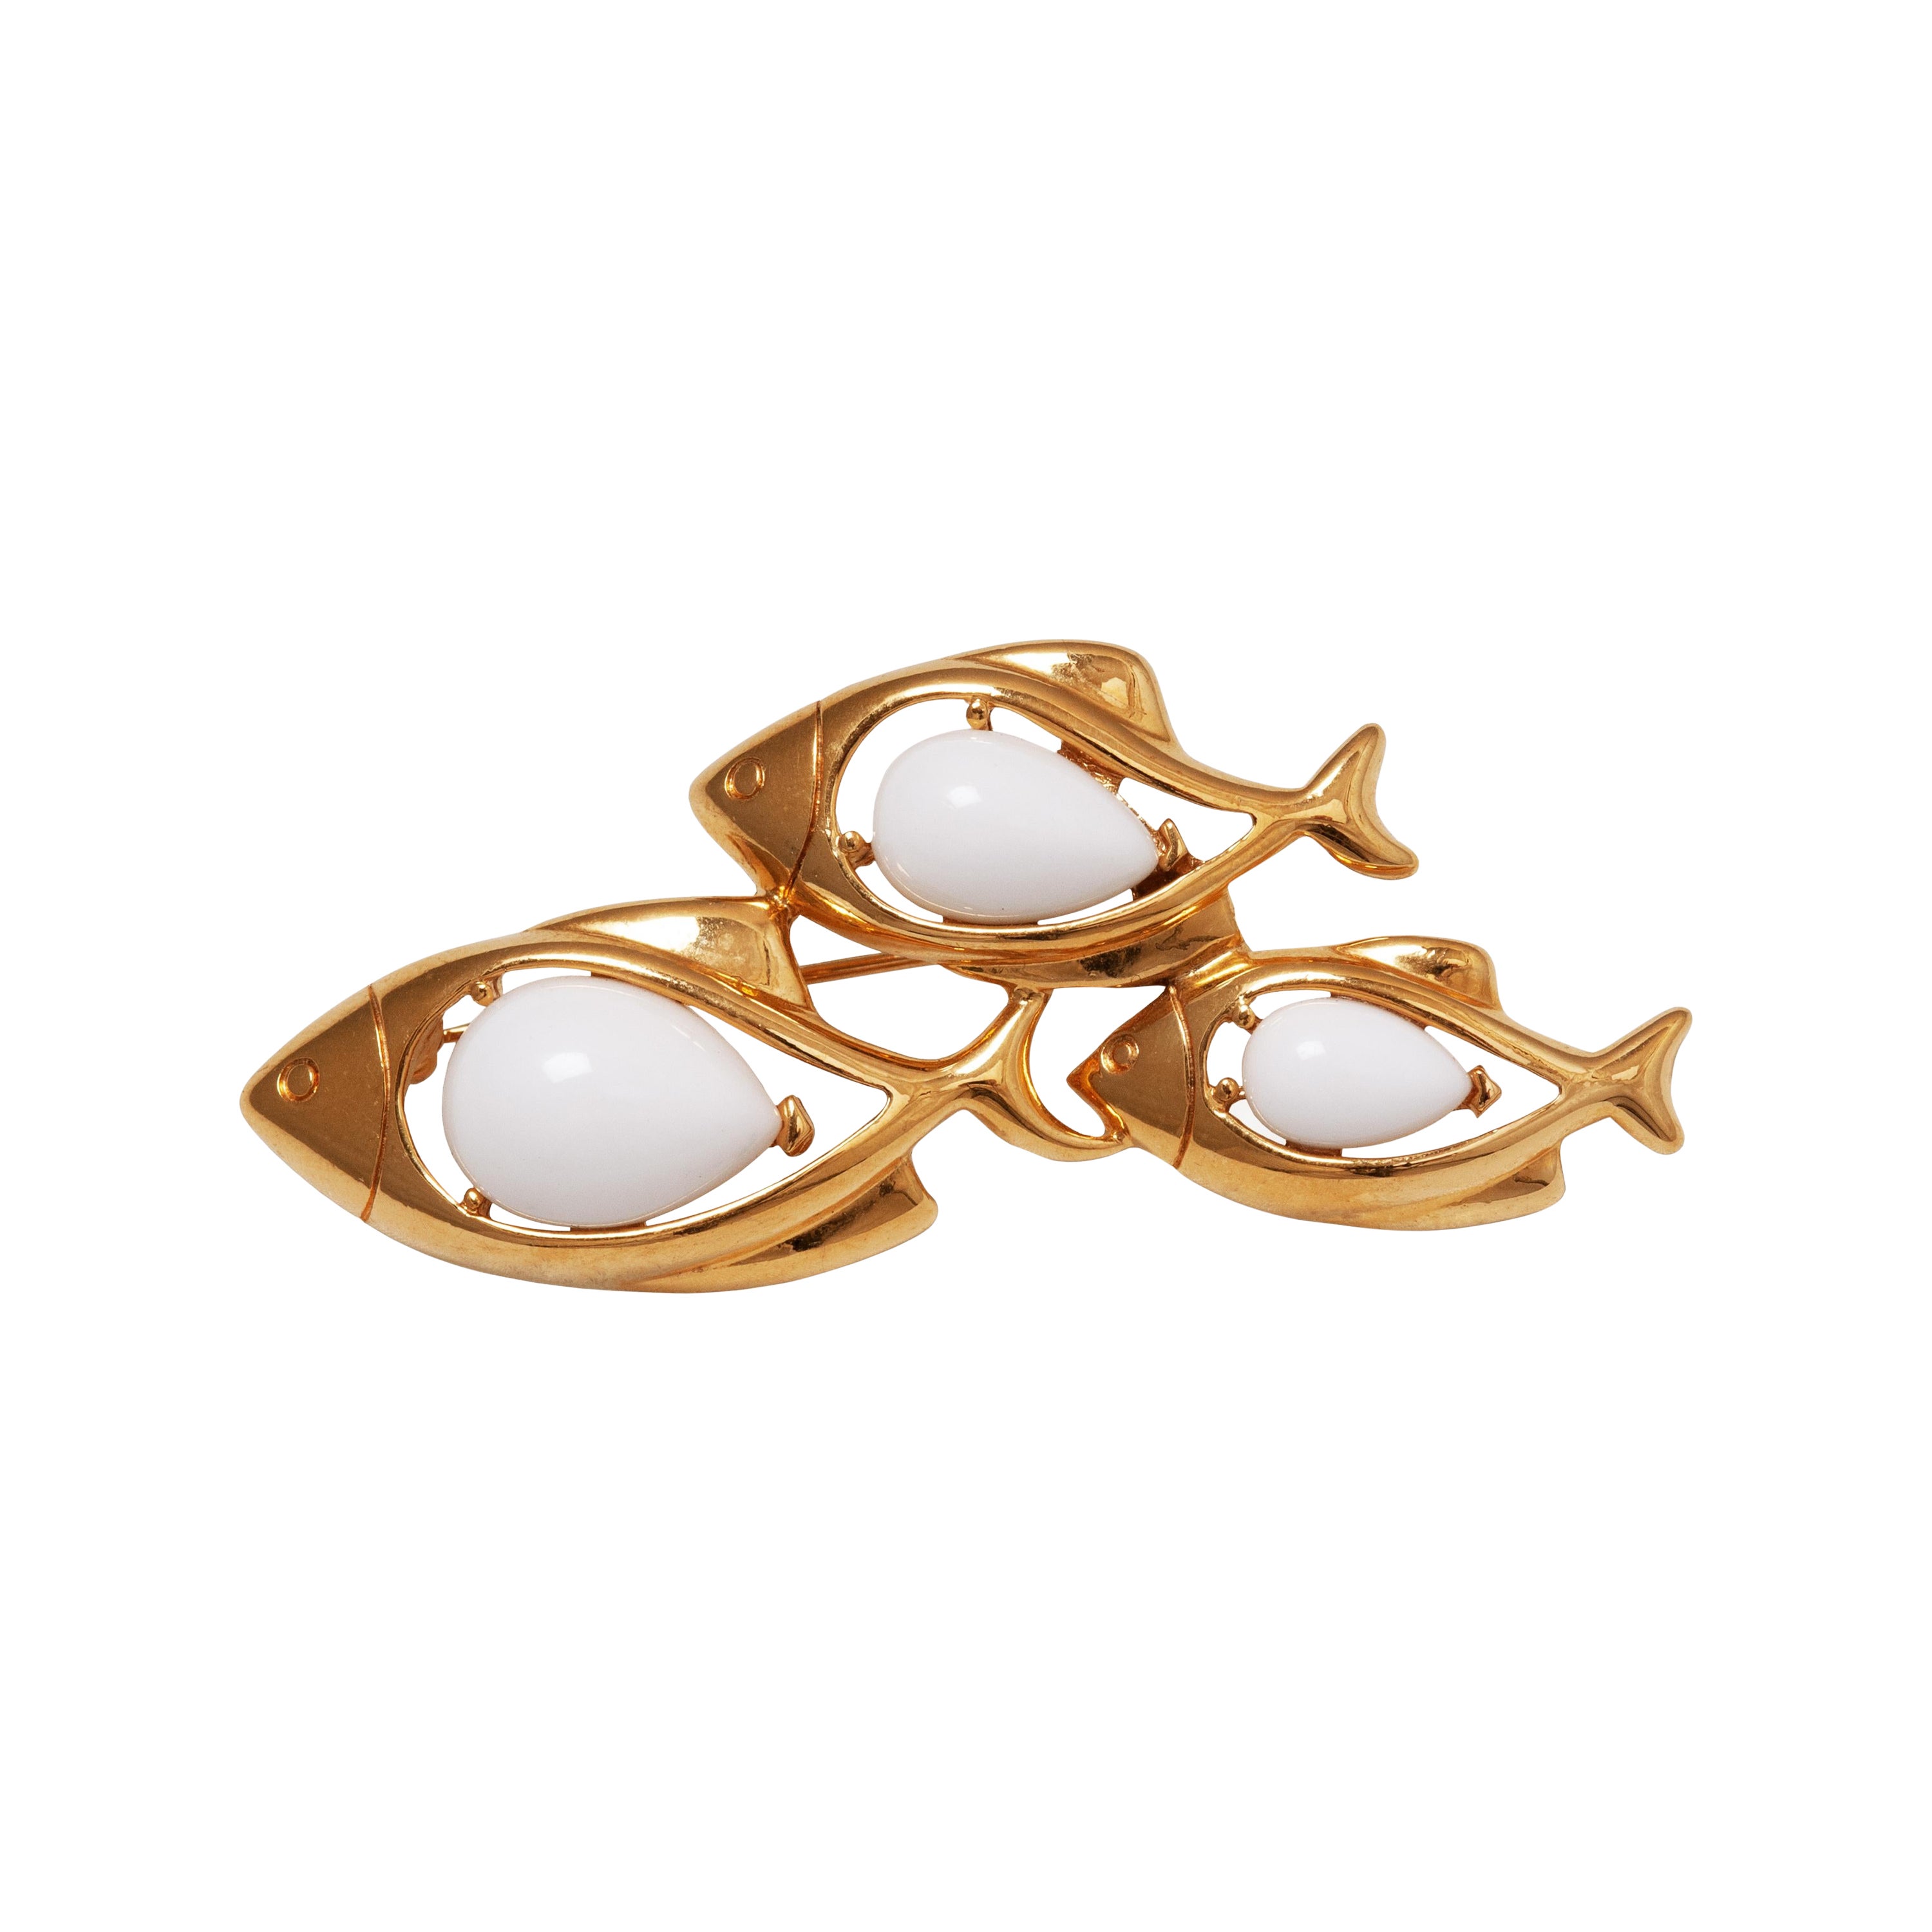 1970s Novelty Trifari Gold and White Trio of Fish Brooch